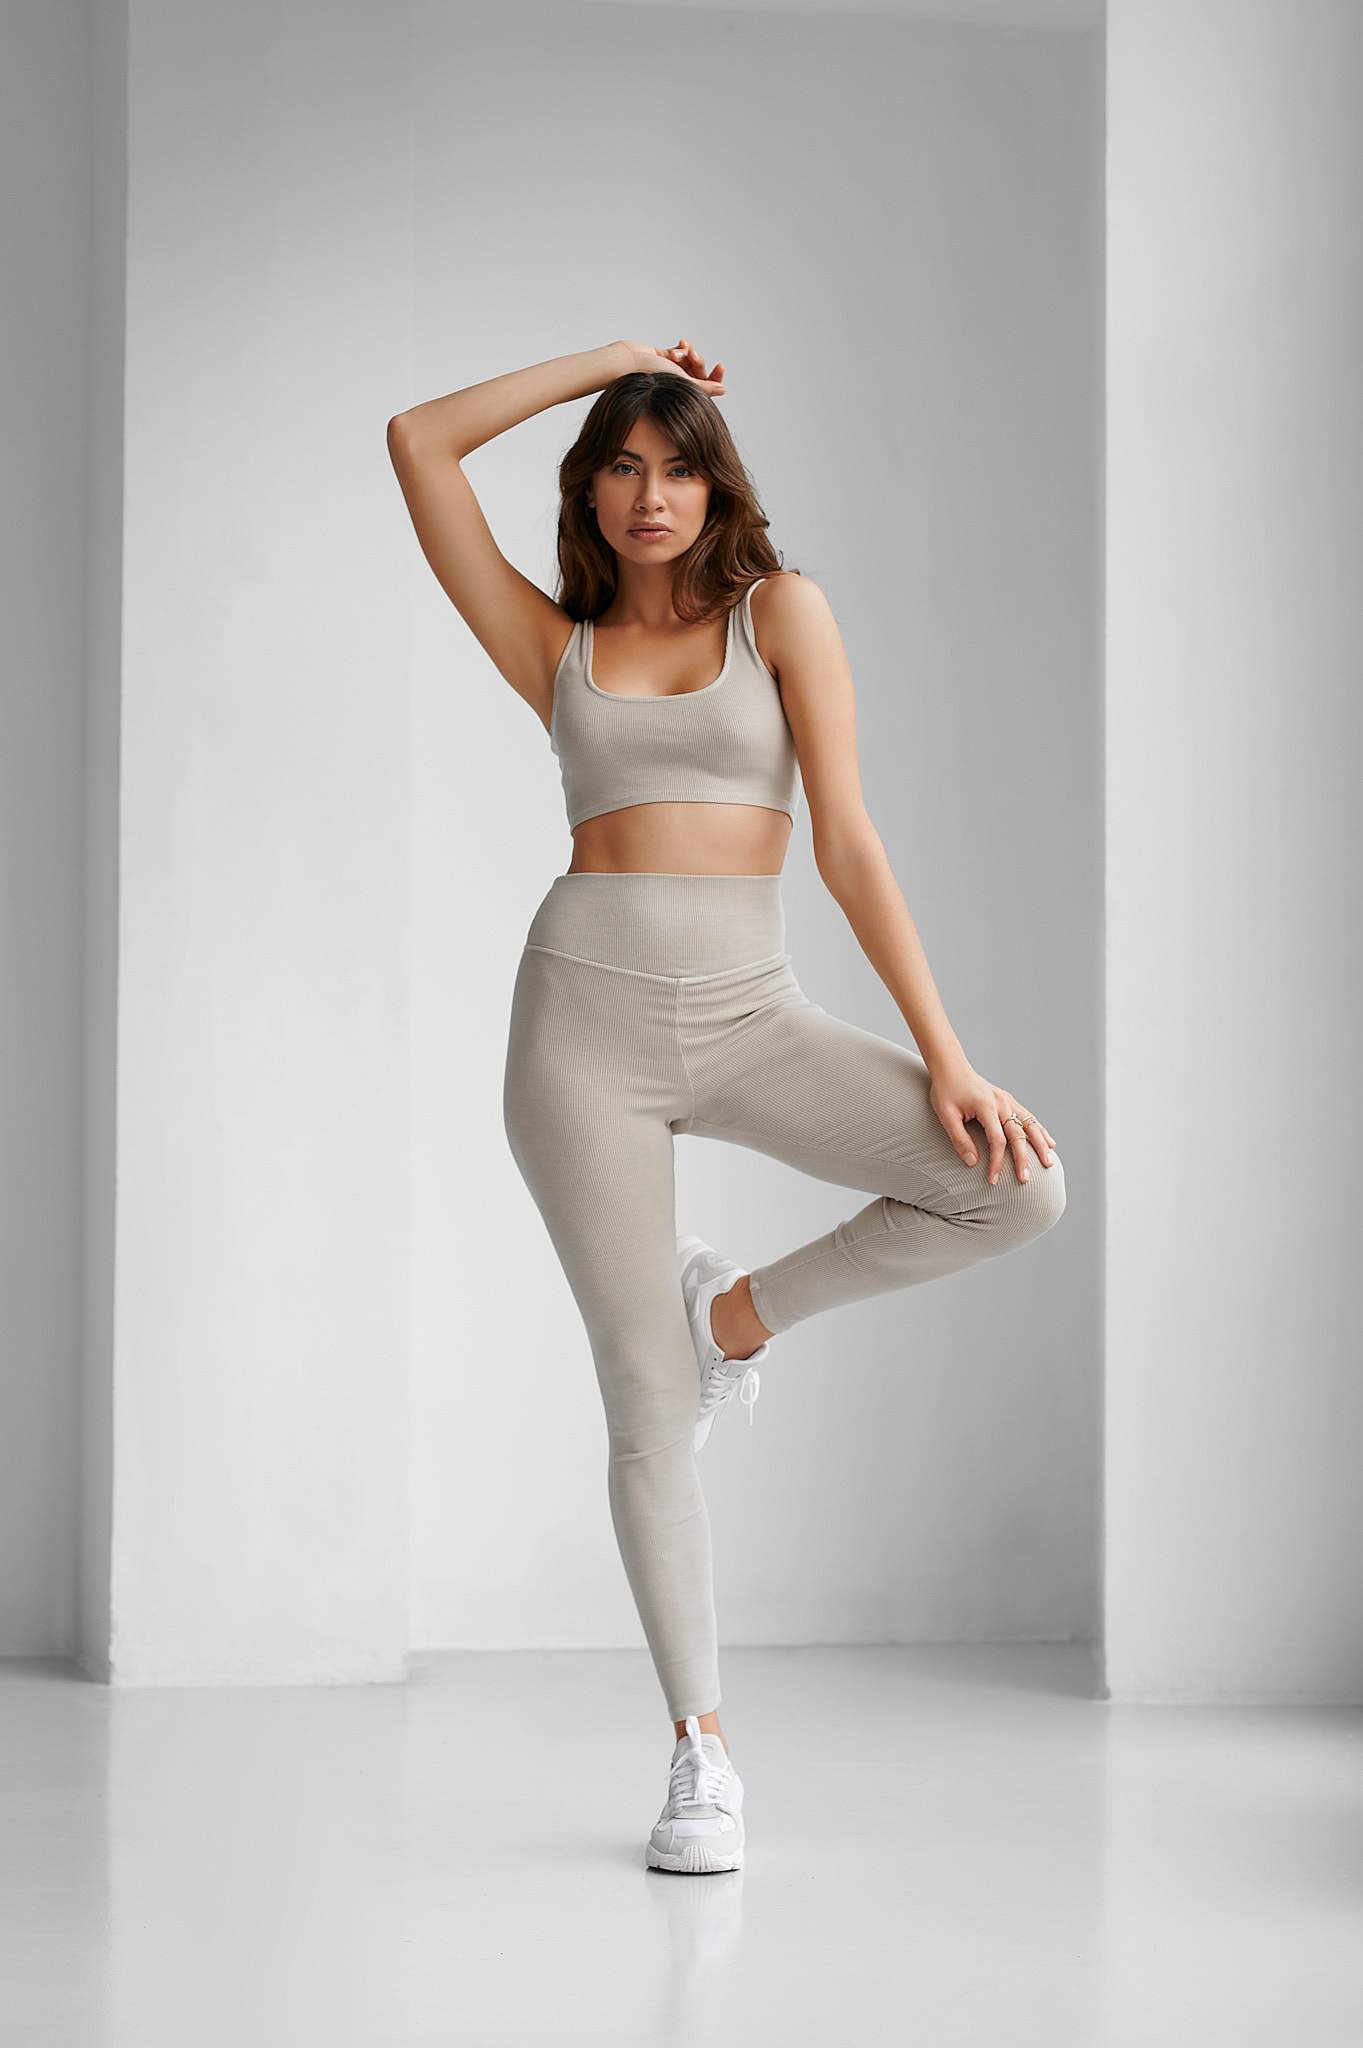 Kefi Top - Charcoal Gray - Front Image - Model in Yoga Pose - Ribbed Fabric - Second-skin fit - Easy-to-Wear & Versatile - Easy-to-Match - High Quality Basic - Streetstyle - Streetwear - Flattering High-raise band - Strategically placed seamed panels - tight fit, adapts to body - worn out feel - Elegant - Casual - Sophisticated - Becca & Cole